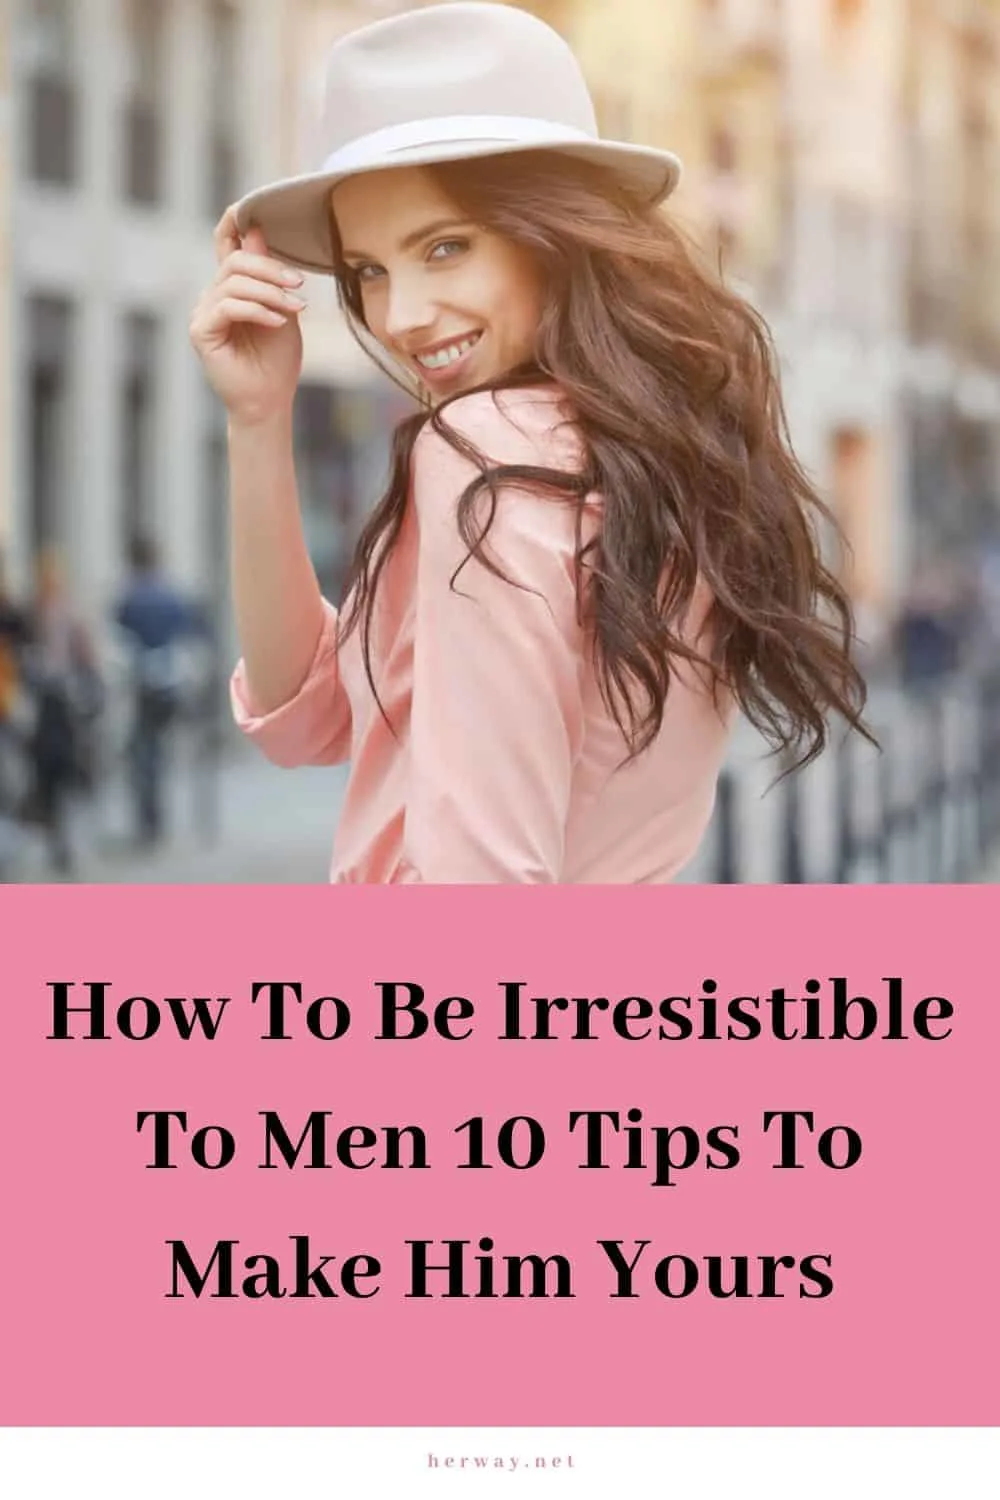 How To Be Irresistible To Men 10 Tips To Make Him Yours